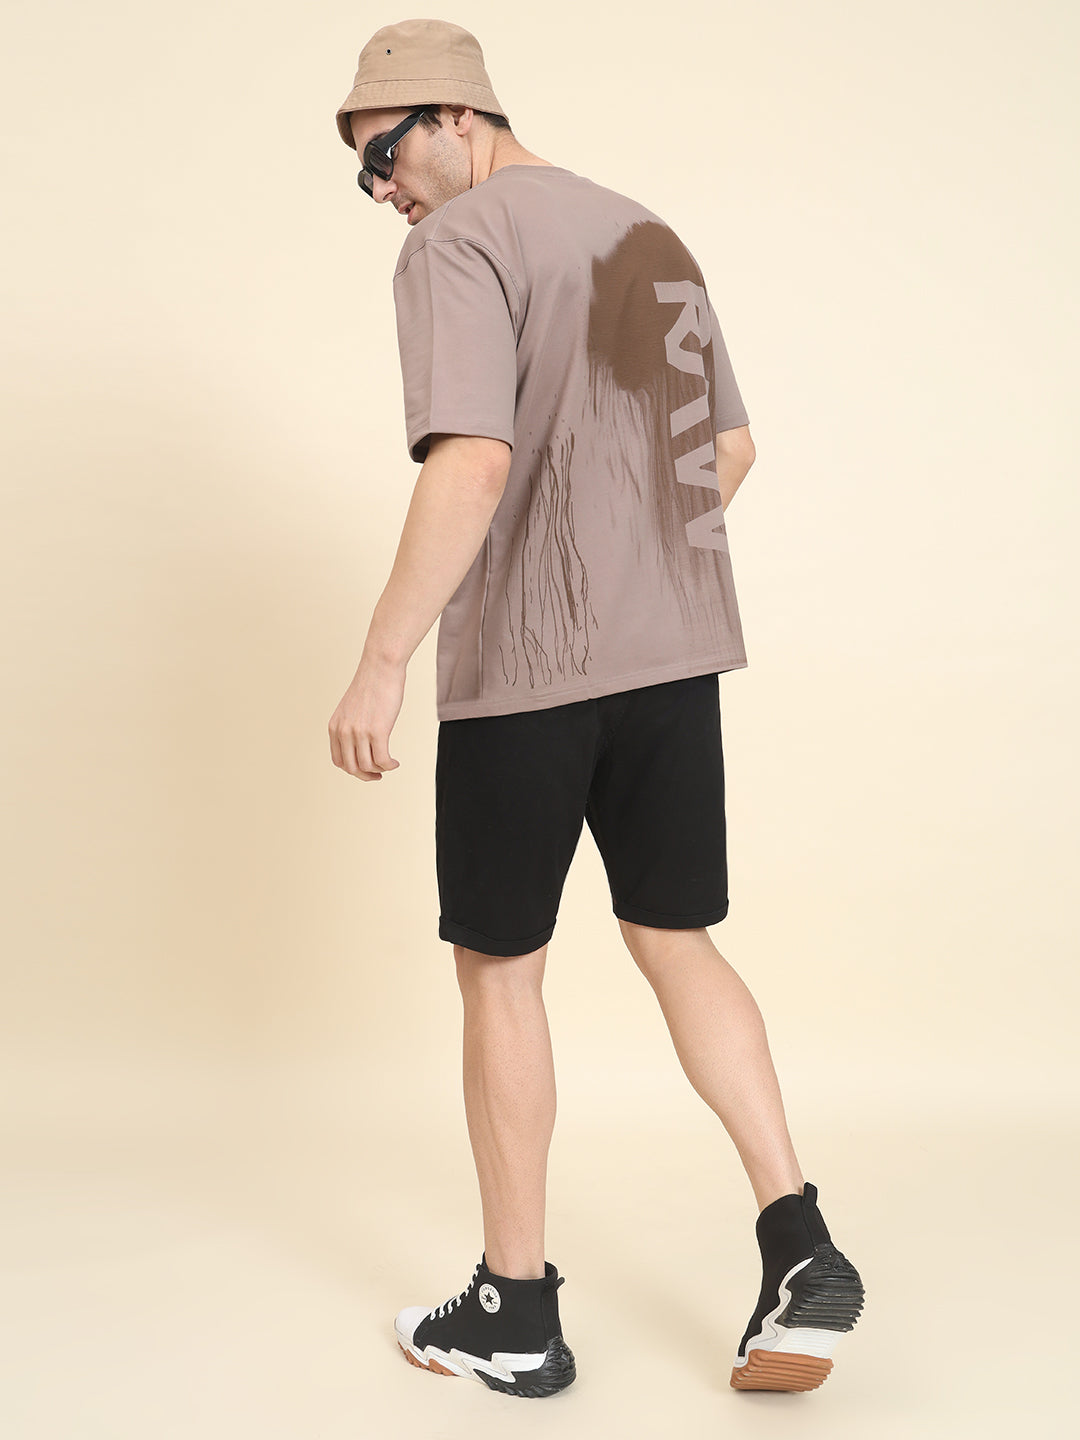 Raw Print Oversized Rosy Brown T-shirt